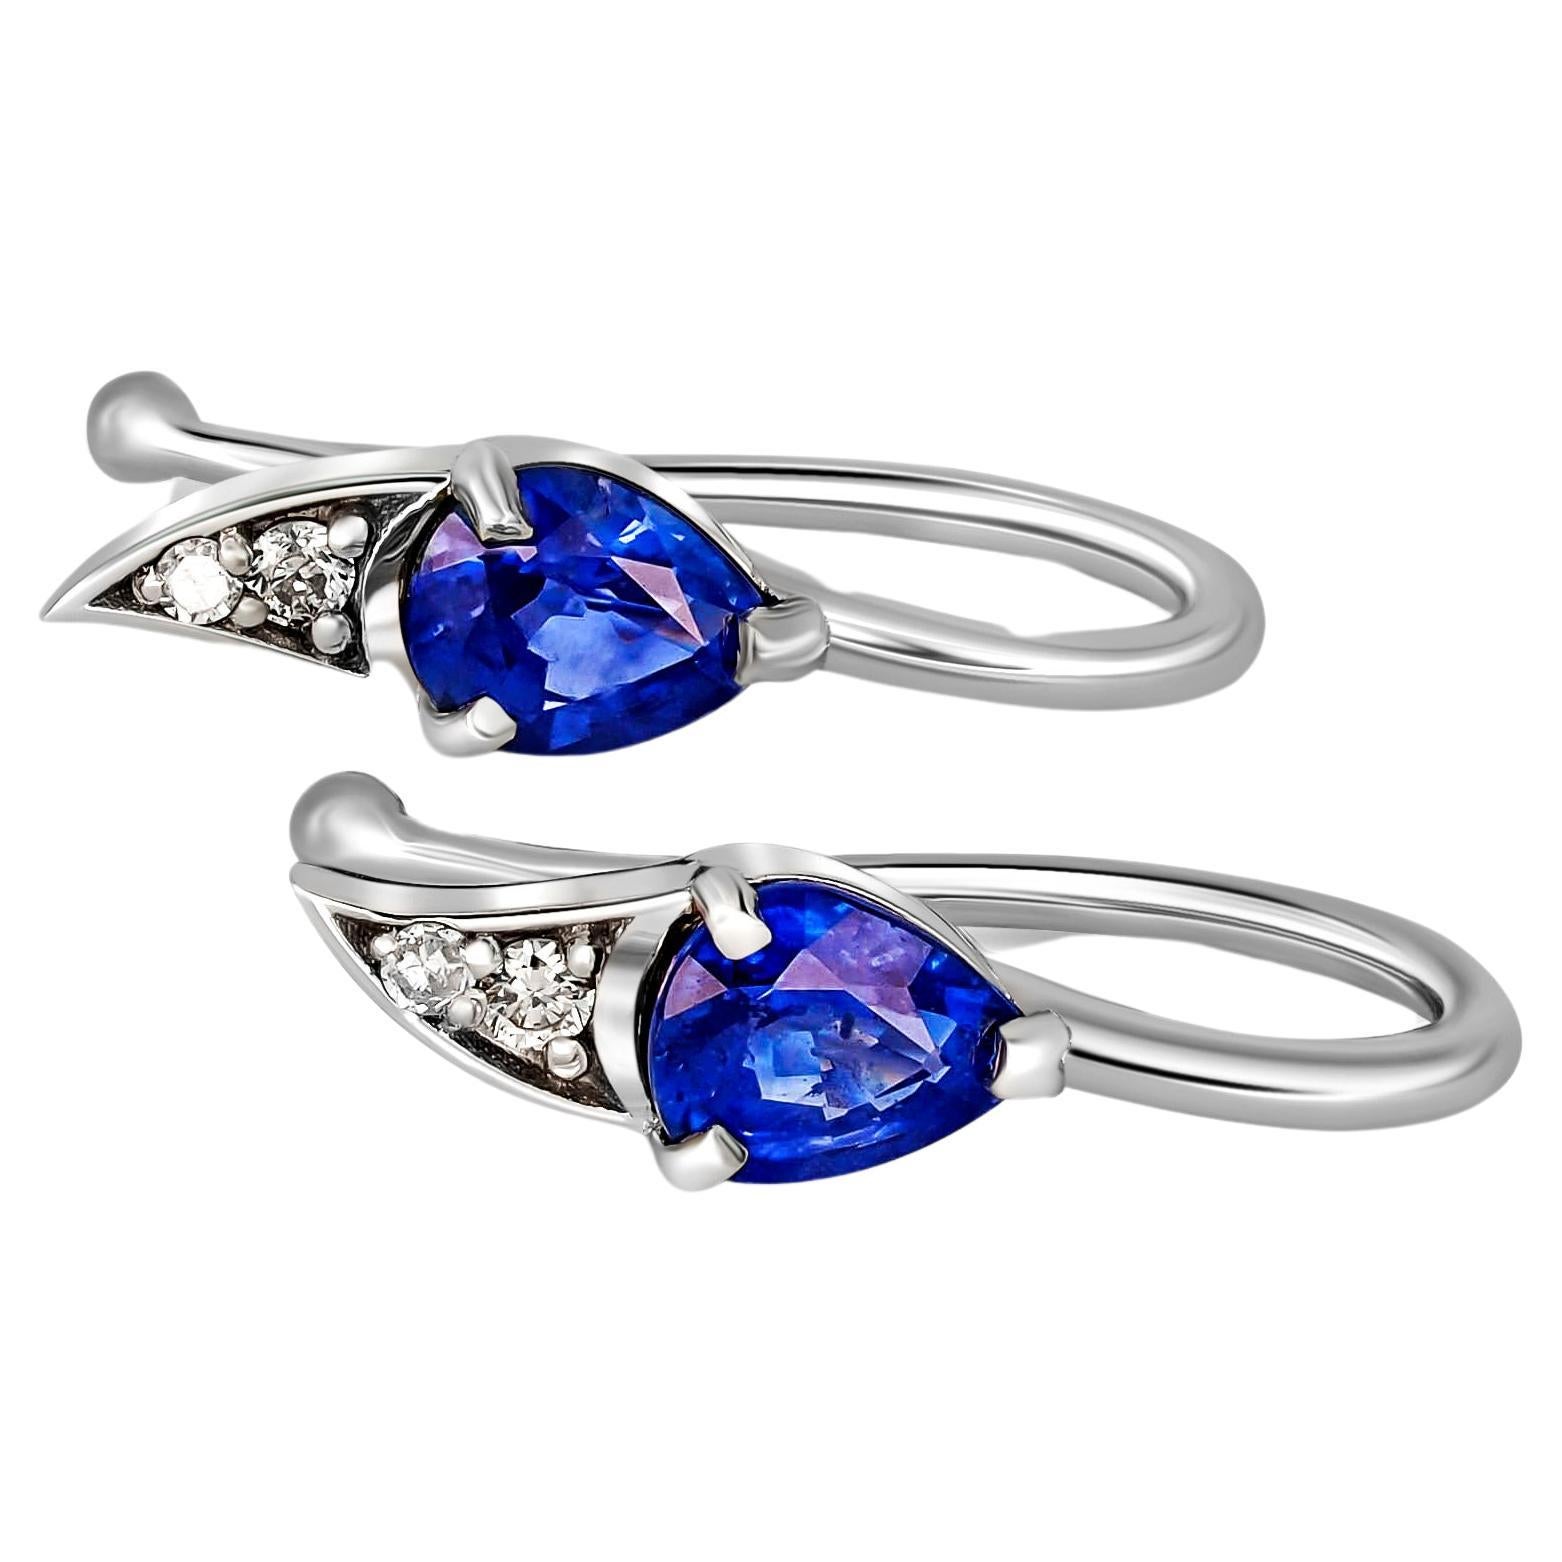 14k Gold Tiny Earrings with Sapphires and Diamonds!